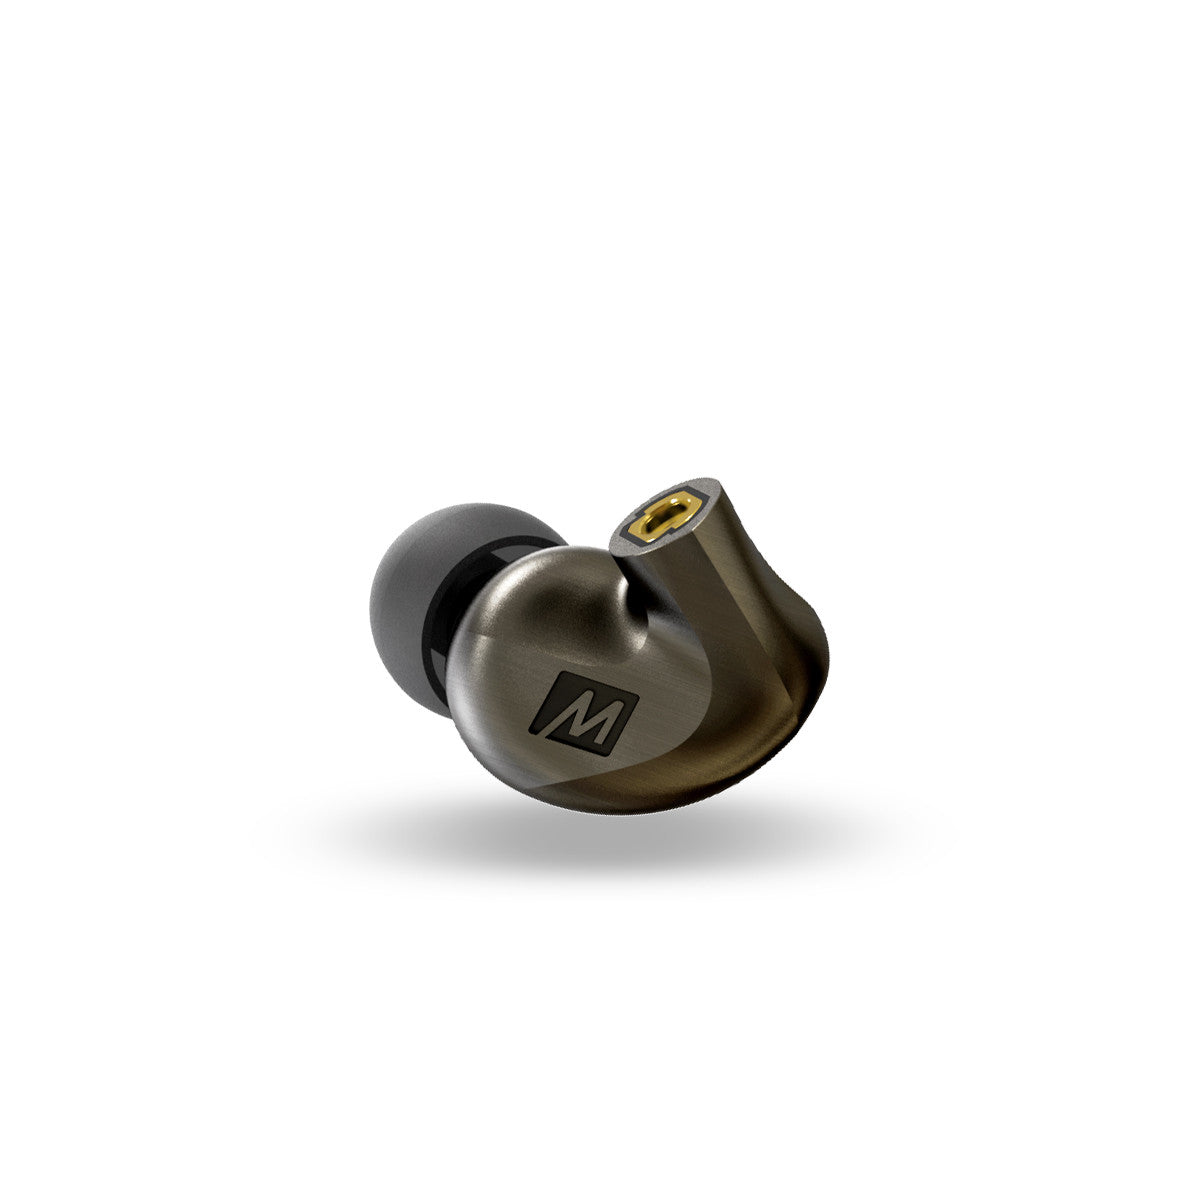 Image of Replacement Earpiece for Pinnacle P1 In-Ear Monitors.